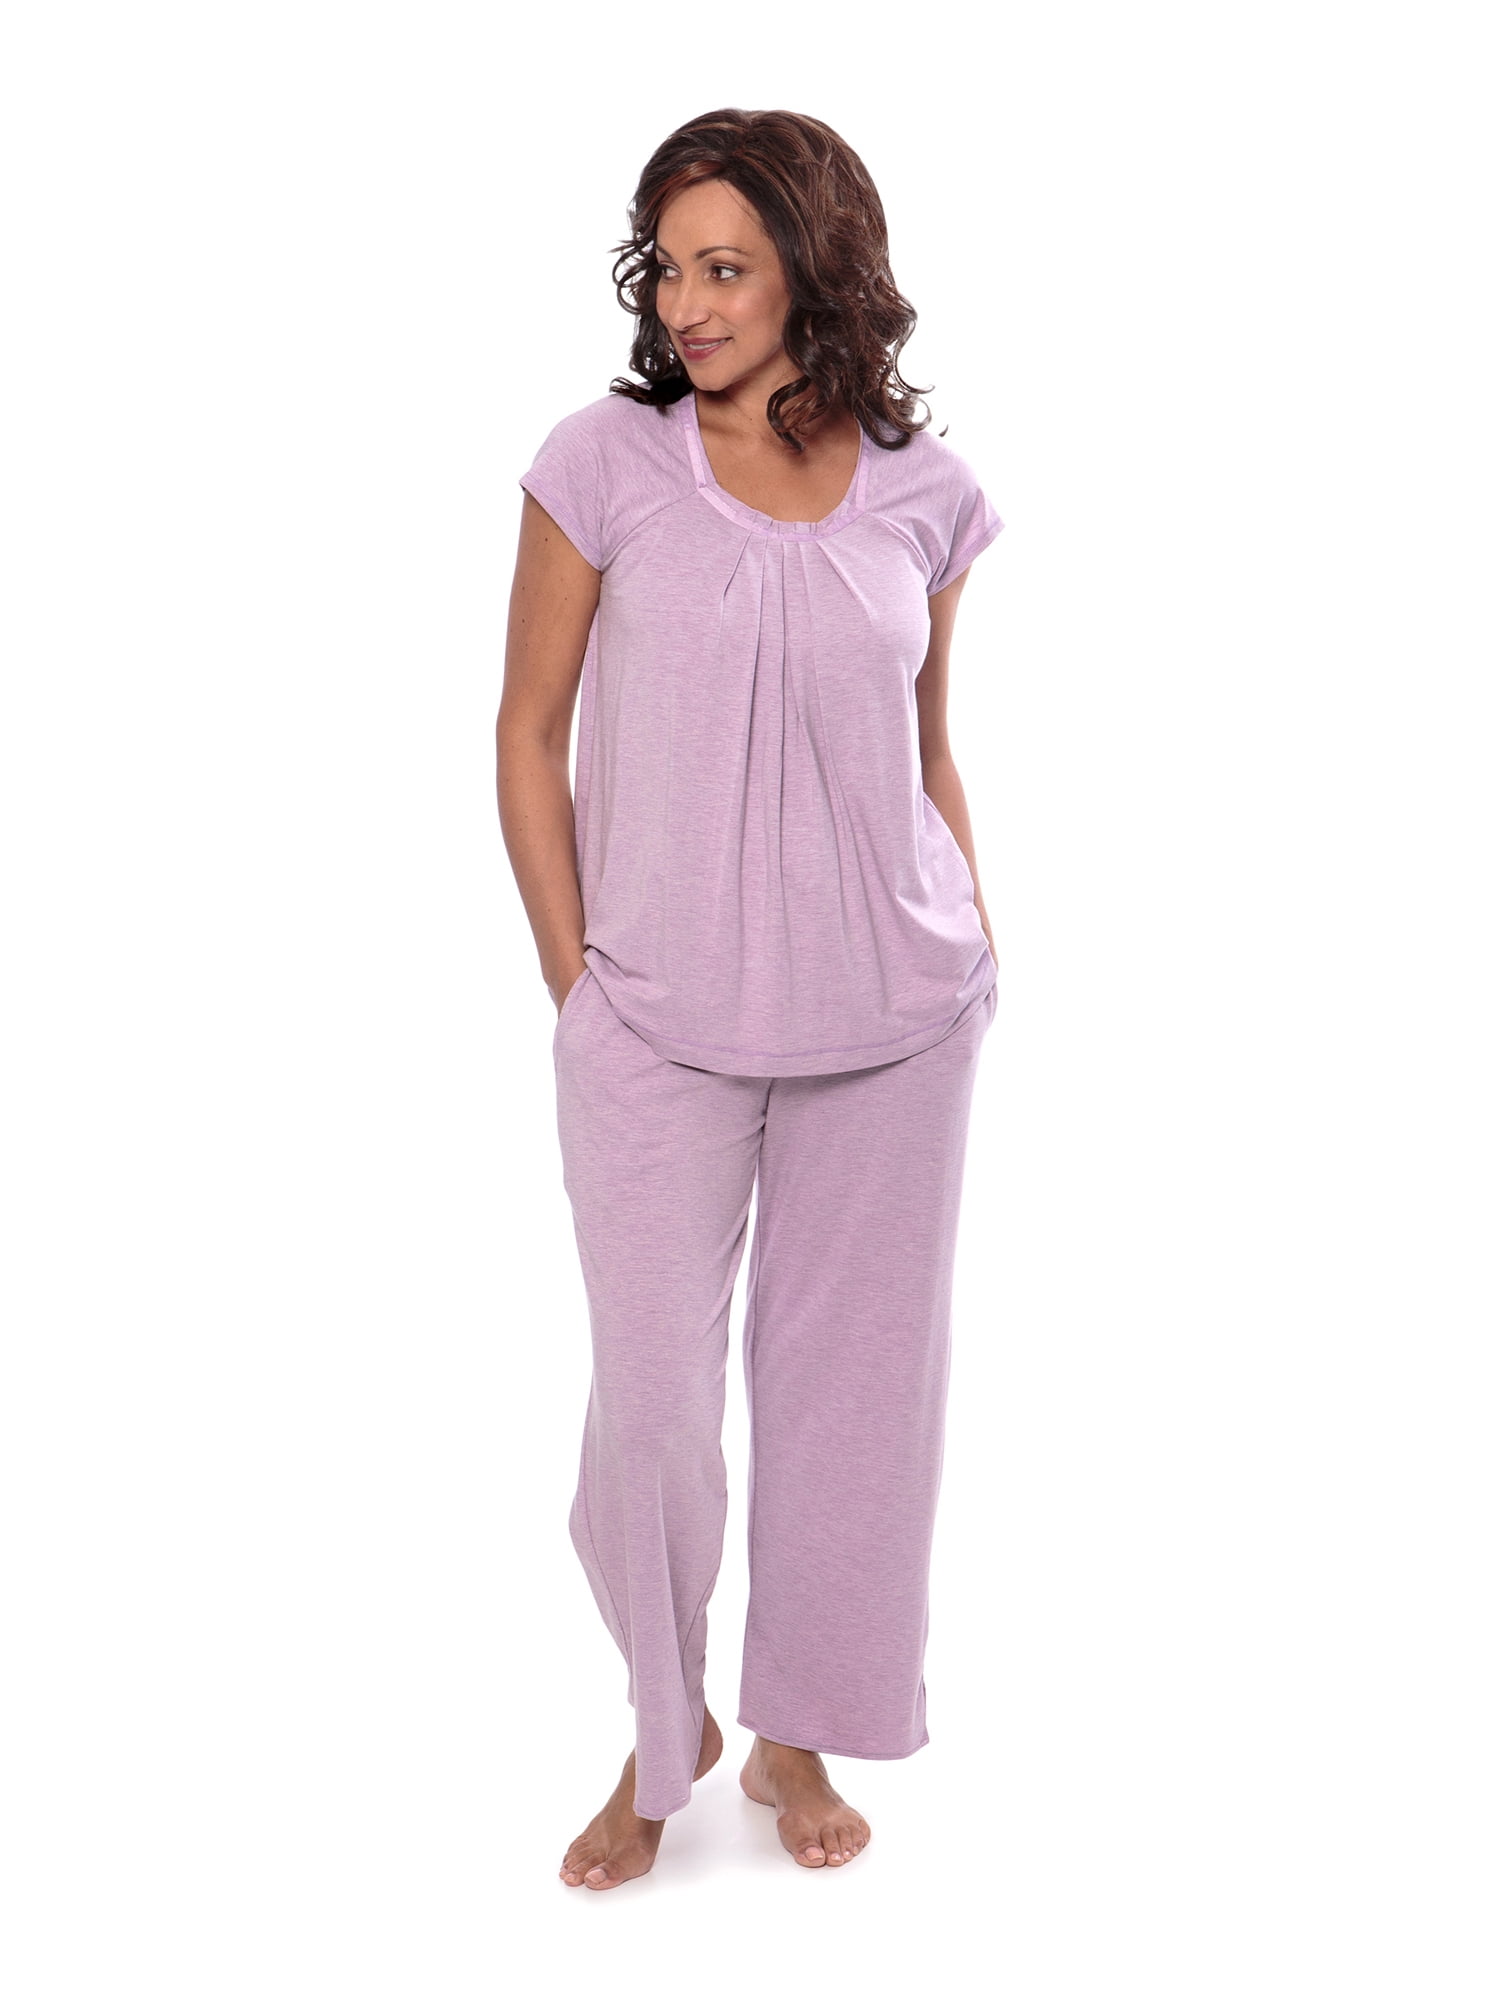 Bamboo Pajamas: Are They Warm Enough for a Cozy Sleep? - PlantHD